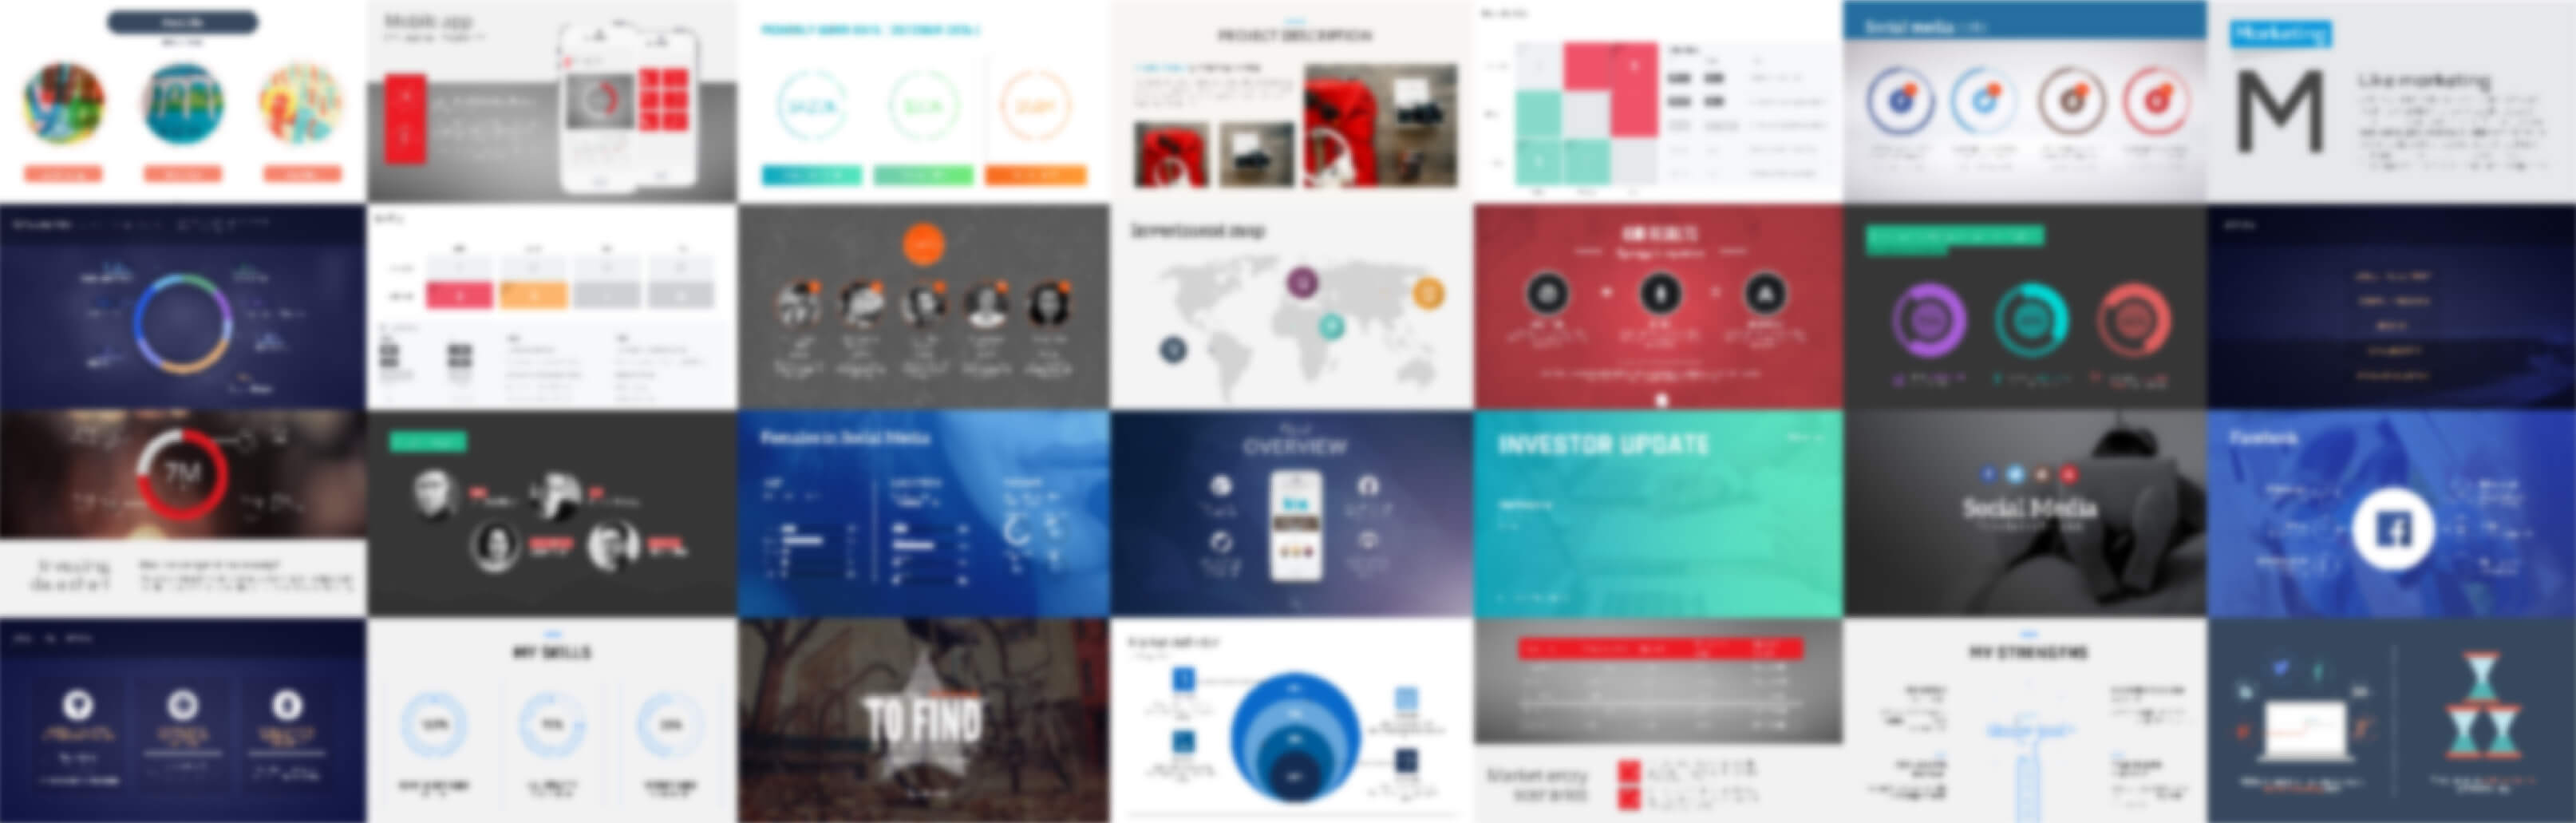 The 22 Best Powerpoint Templates For 2019 | Improve Presentation Throughout Powerpoint Photo Slideshow Template